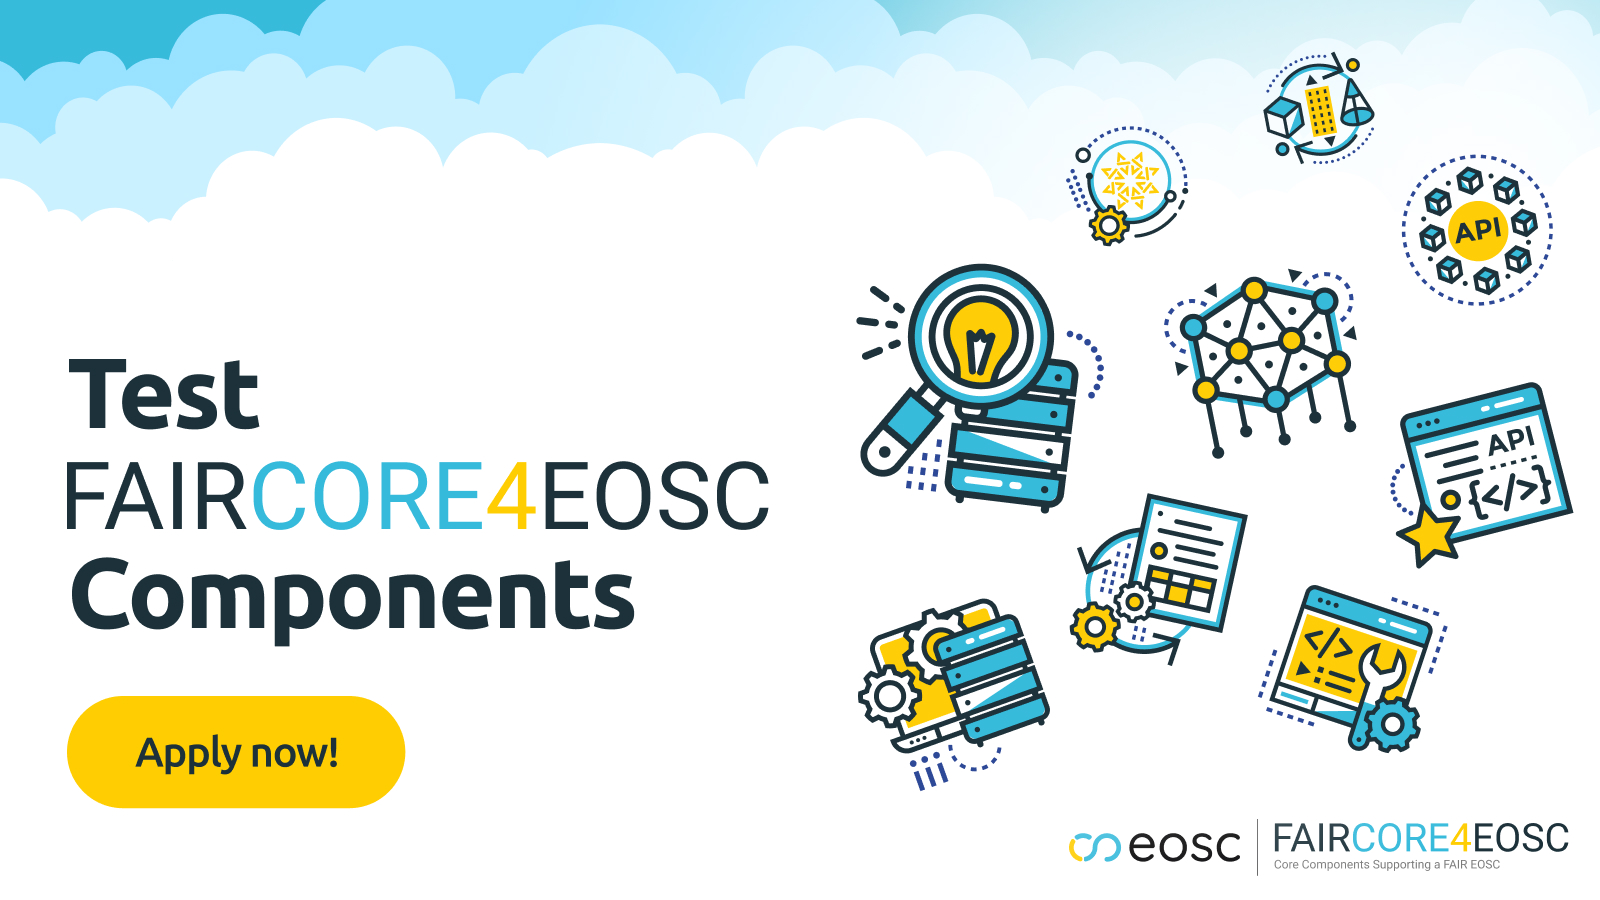 Apply to test the FAIRCORE4EOSC Components